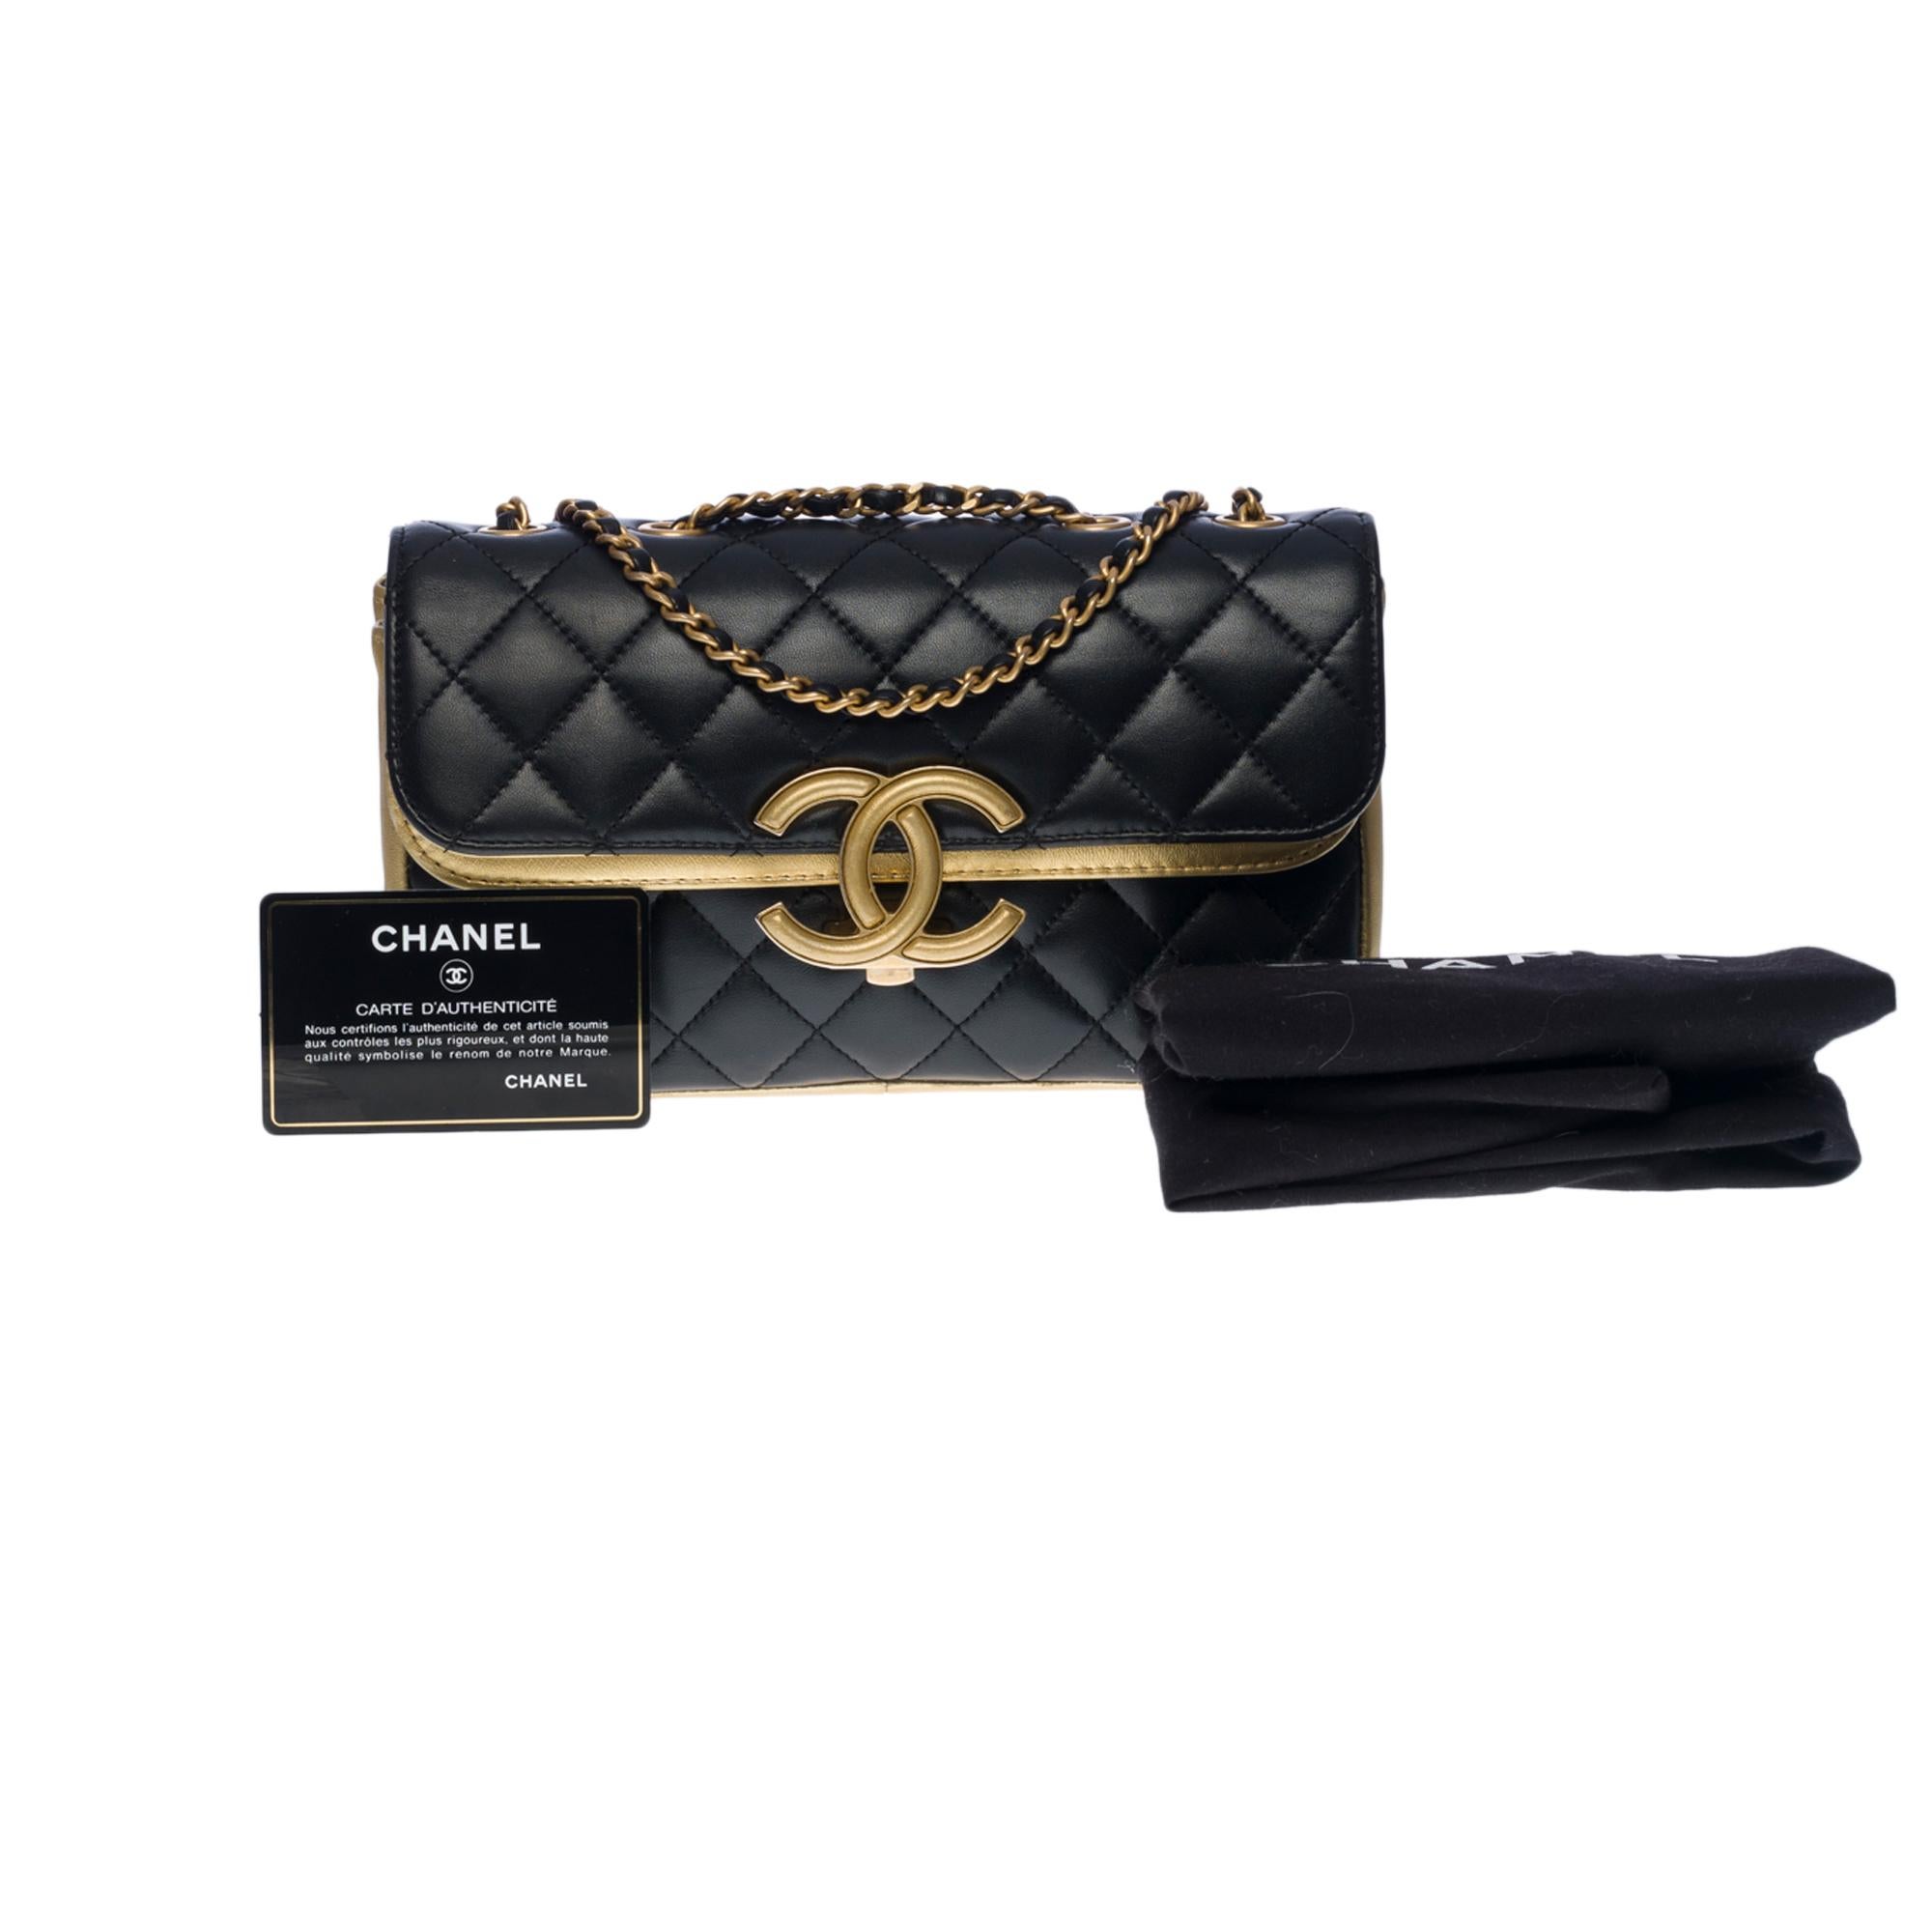 Chanel Classic double flap shoulder bag in black and gold quilted leather , GHW 5